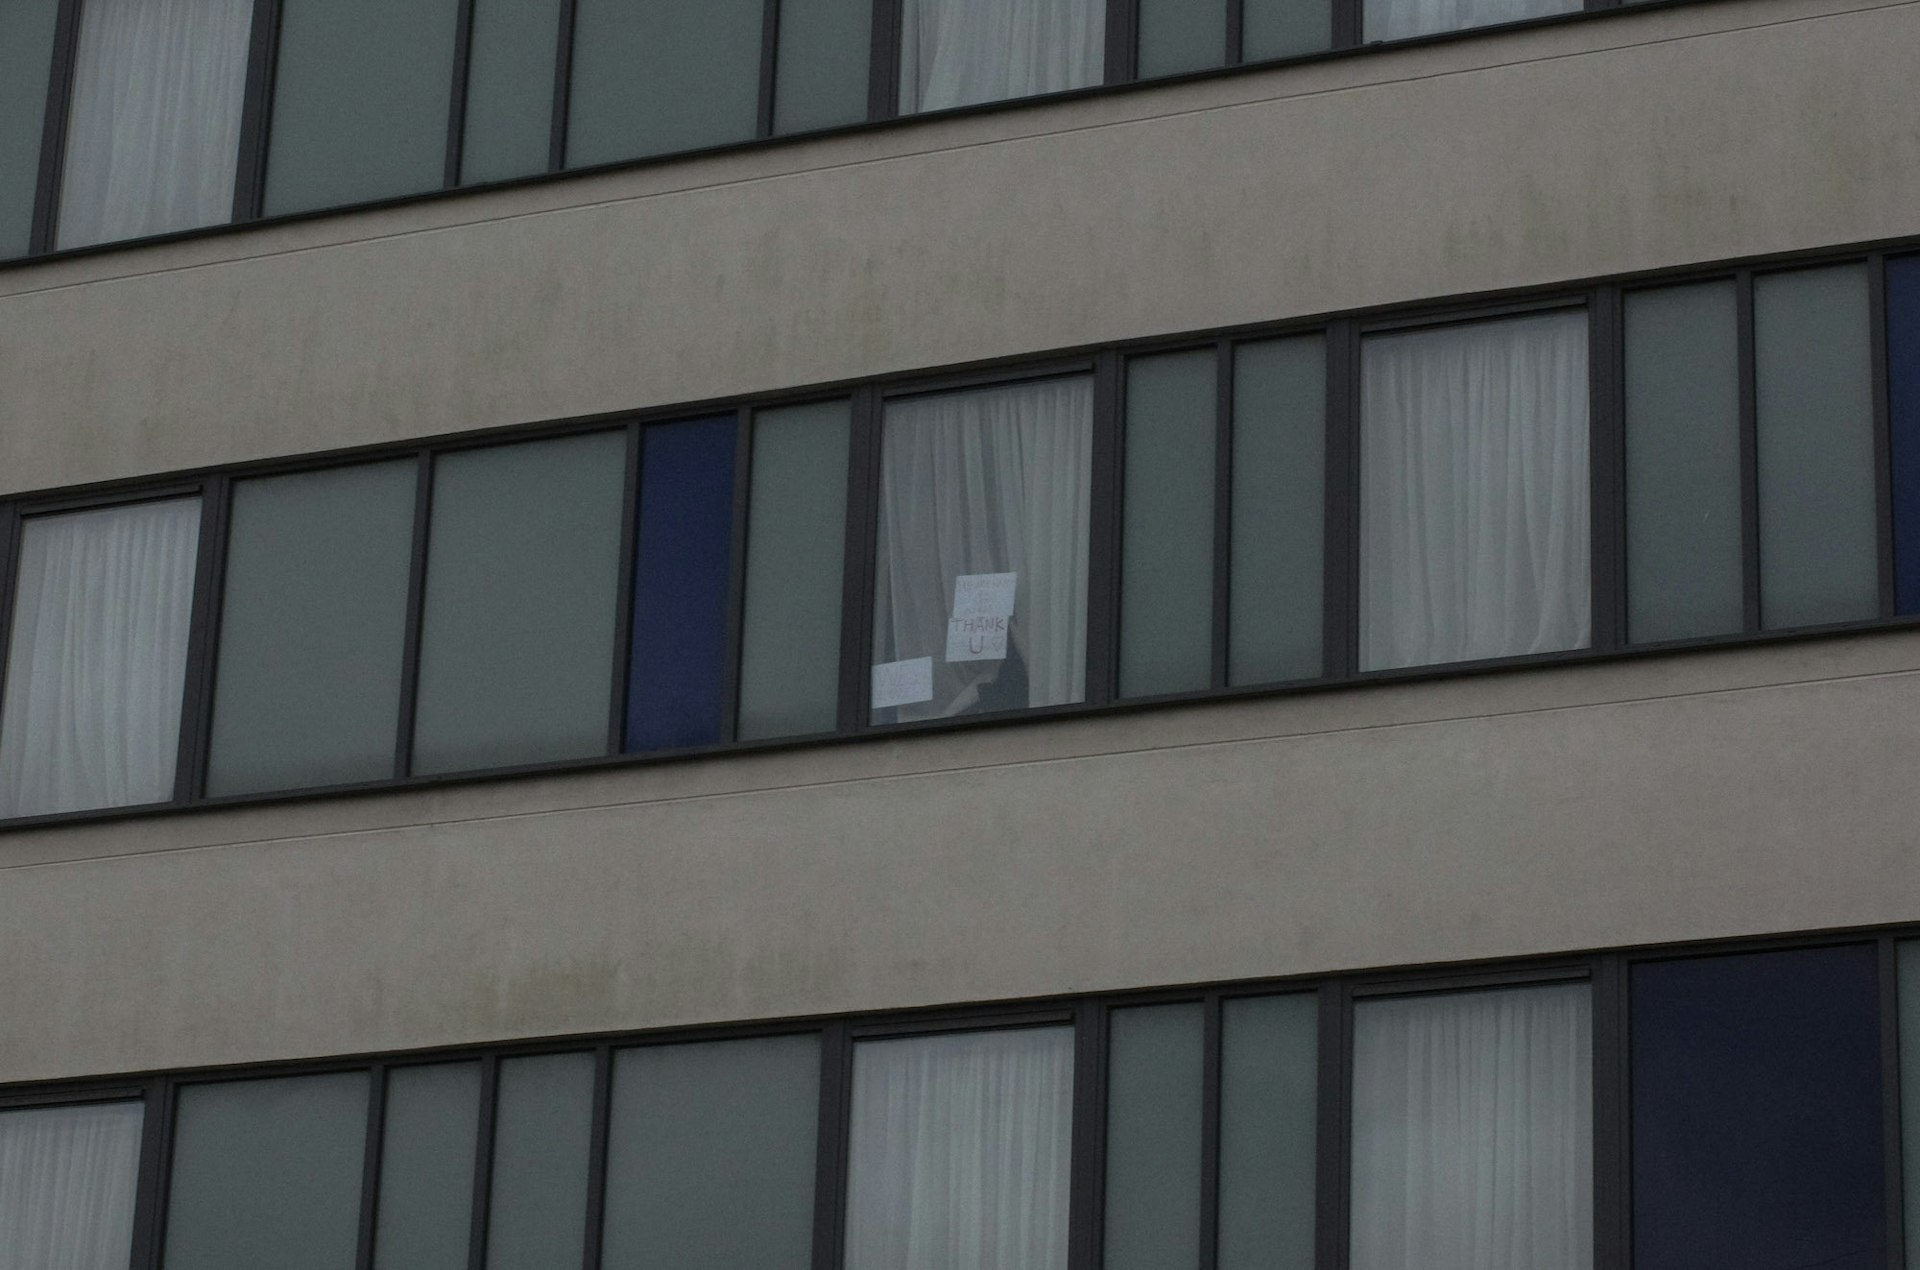 A message of thanks from the window of a hotel in Rotherham housing migrants.